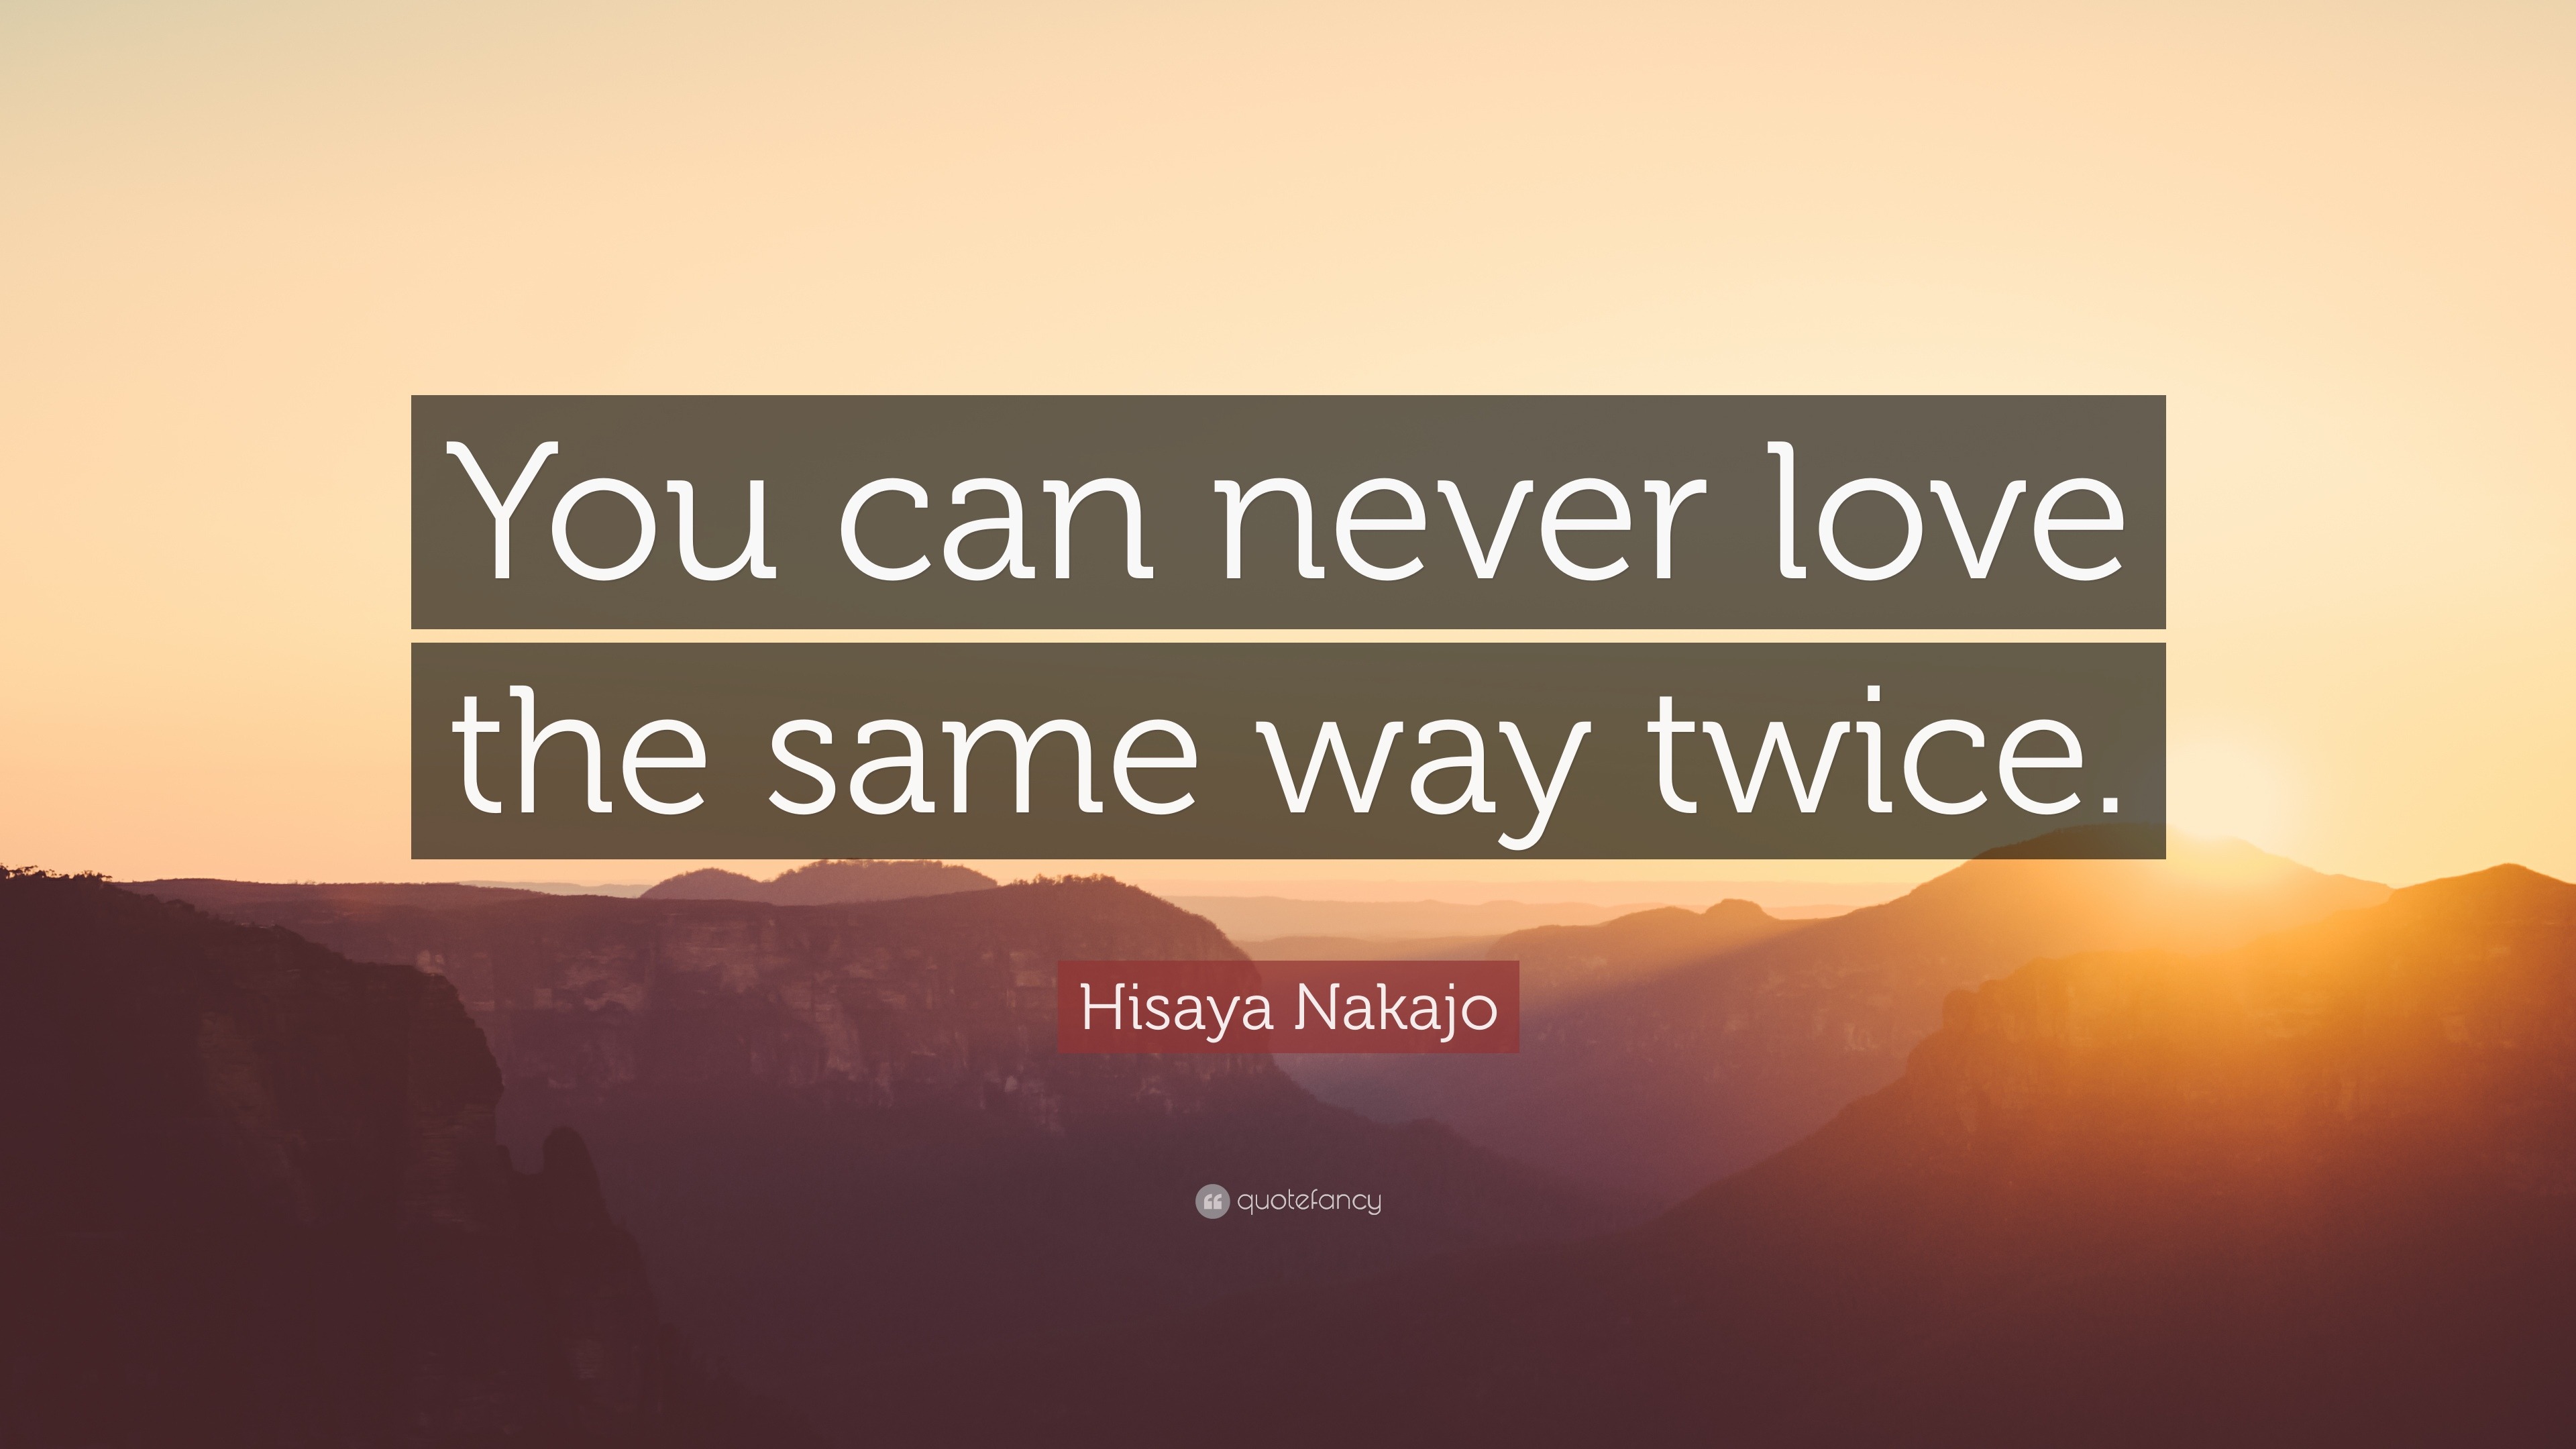 Hisaya Nakajo Quote “You can never love the same way twice ”